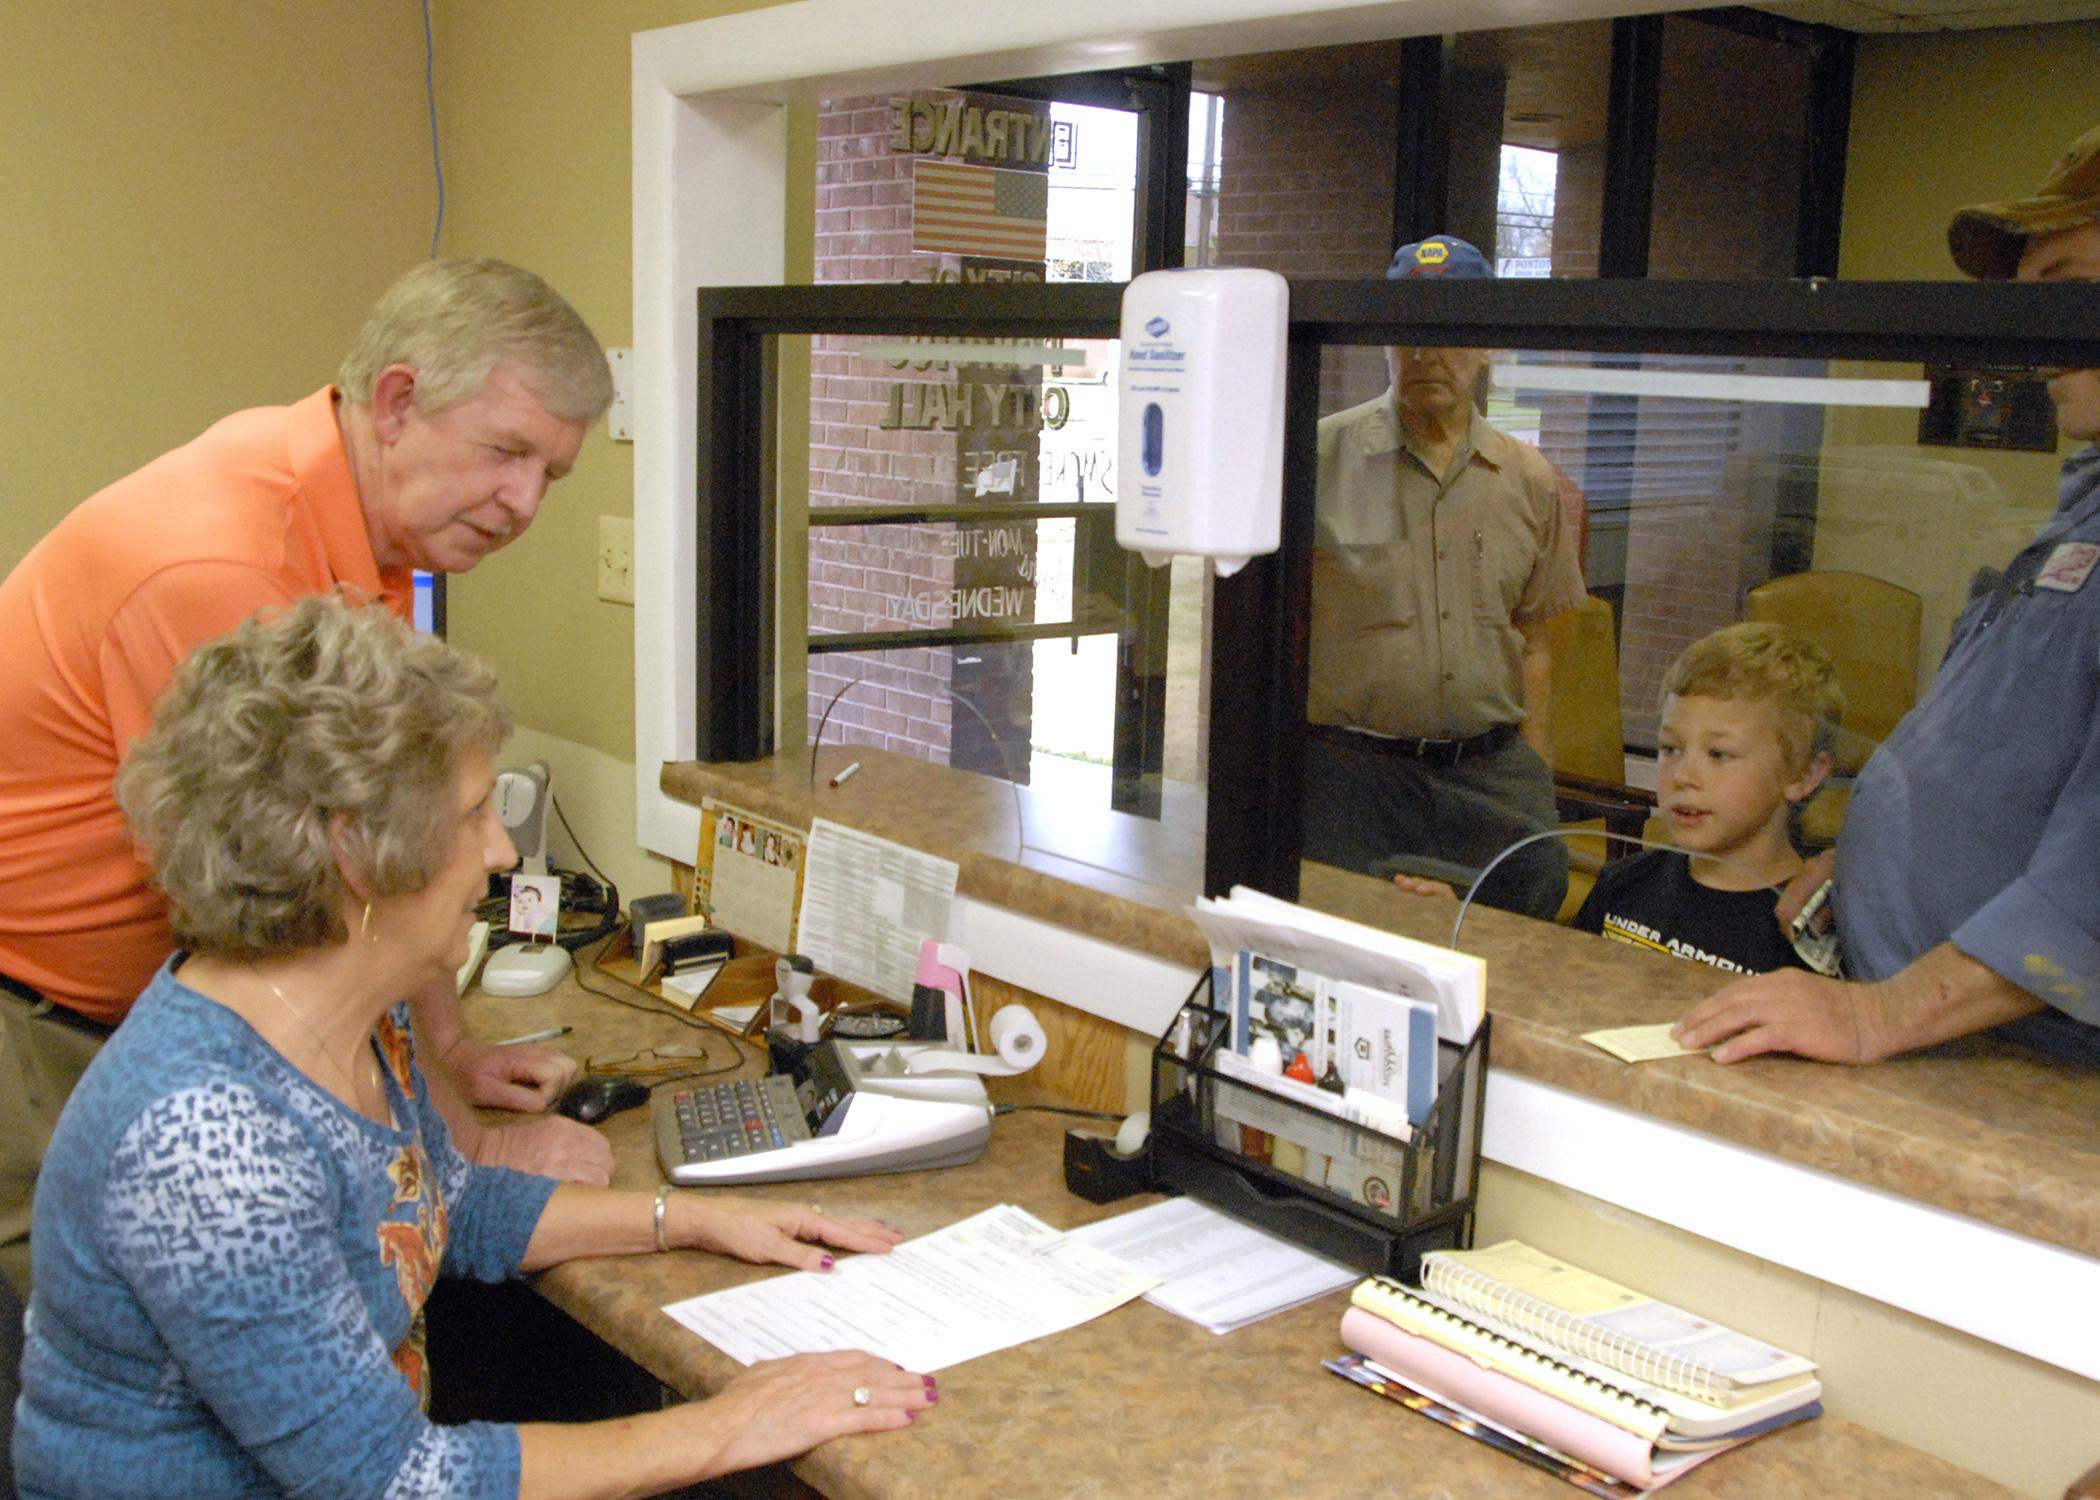 Pontotoc city clerk Dexter Warren and deputy clerk Jamie Sappington assist city residents with utility payments and other city business. The week of May 5 - 11 has been designated Municipal Clerks Week to recognize the service of clerks and their deputies to communities. (Photo by MSU Extension Service Center for Government and Community Development/Bob Ratliff)